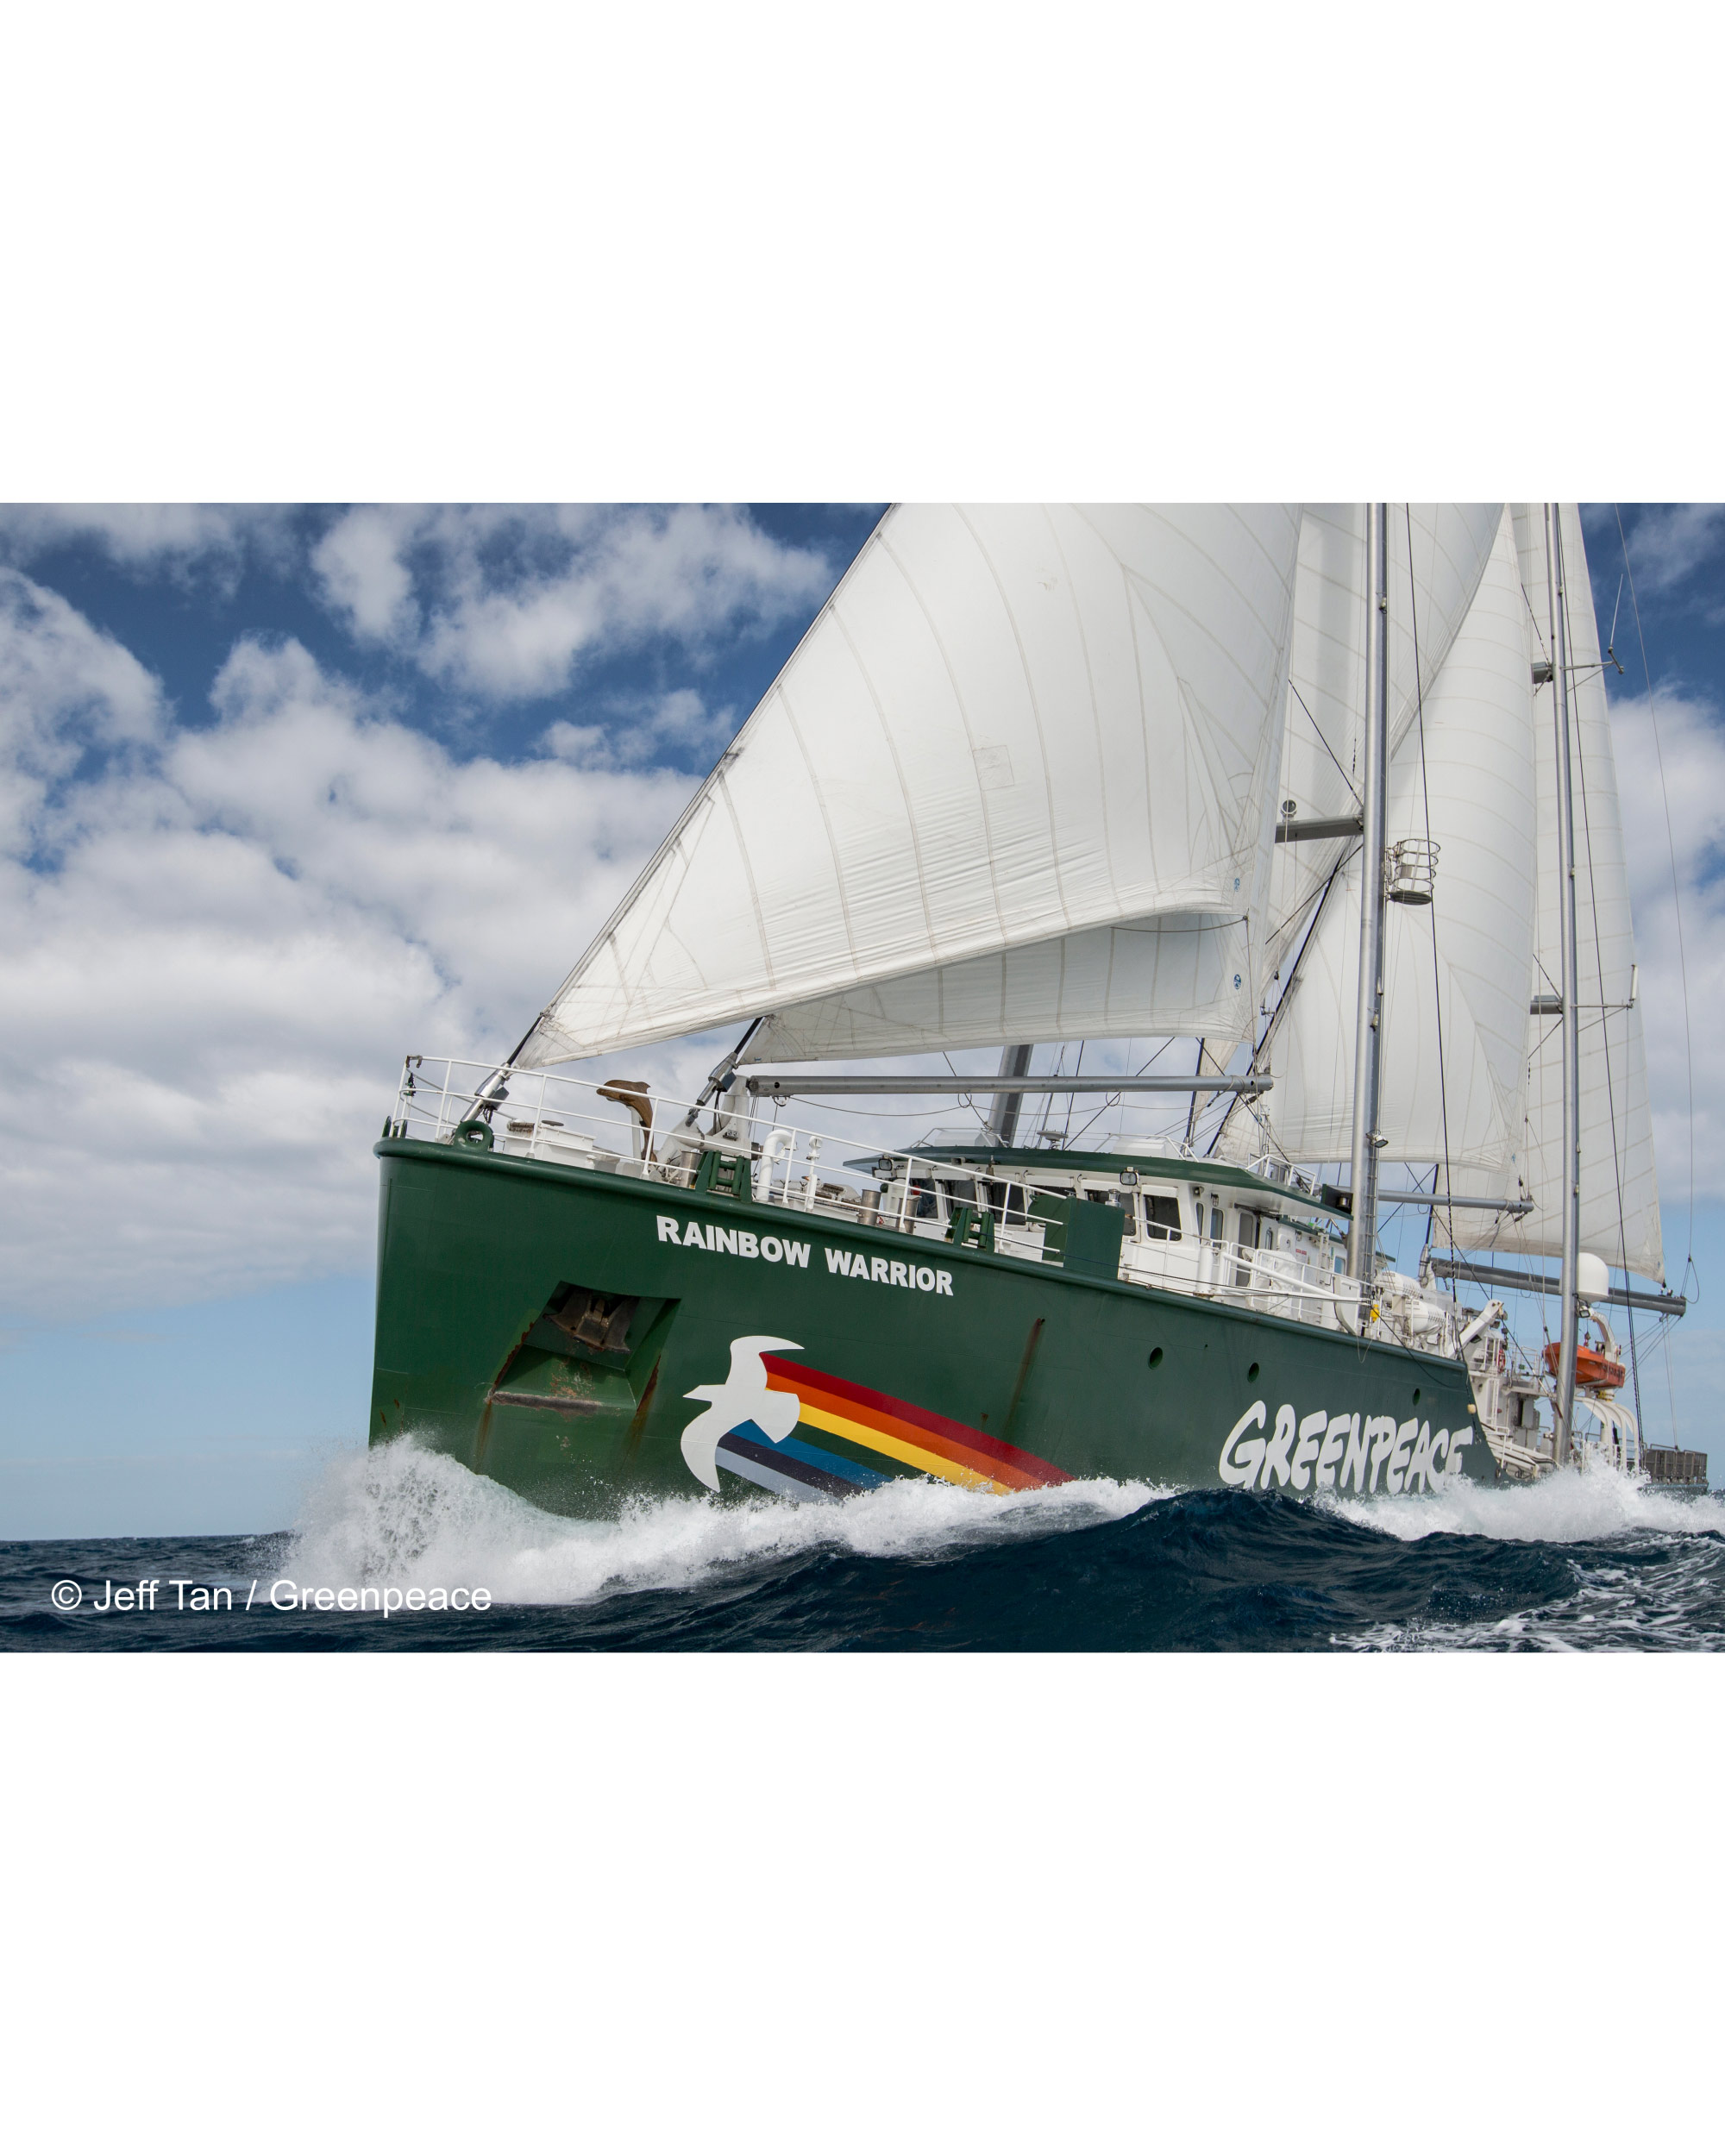 Rainbow Warrior III at sail on the Great Barrier Reef. Image courtesy of Greenpeace.